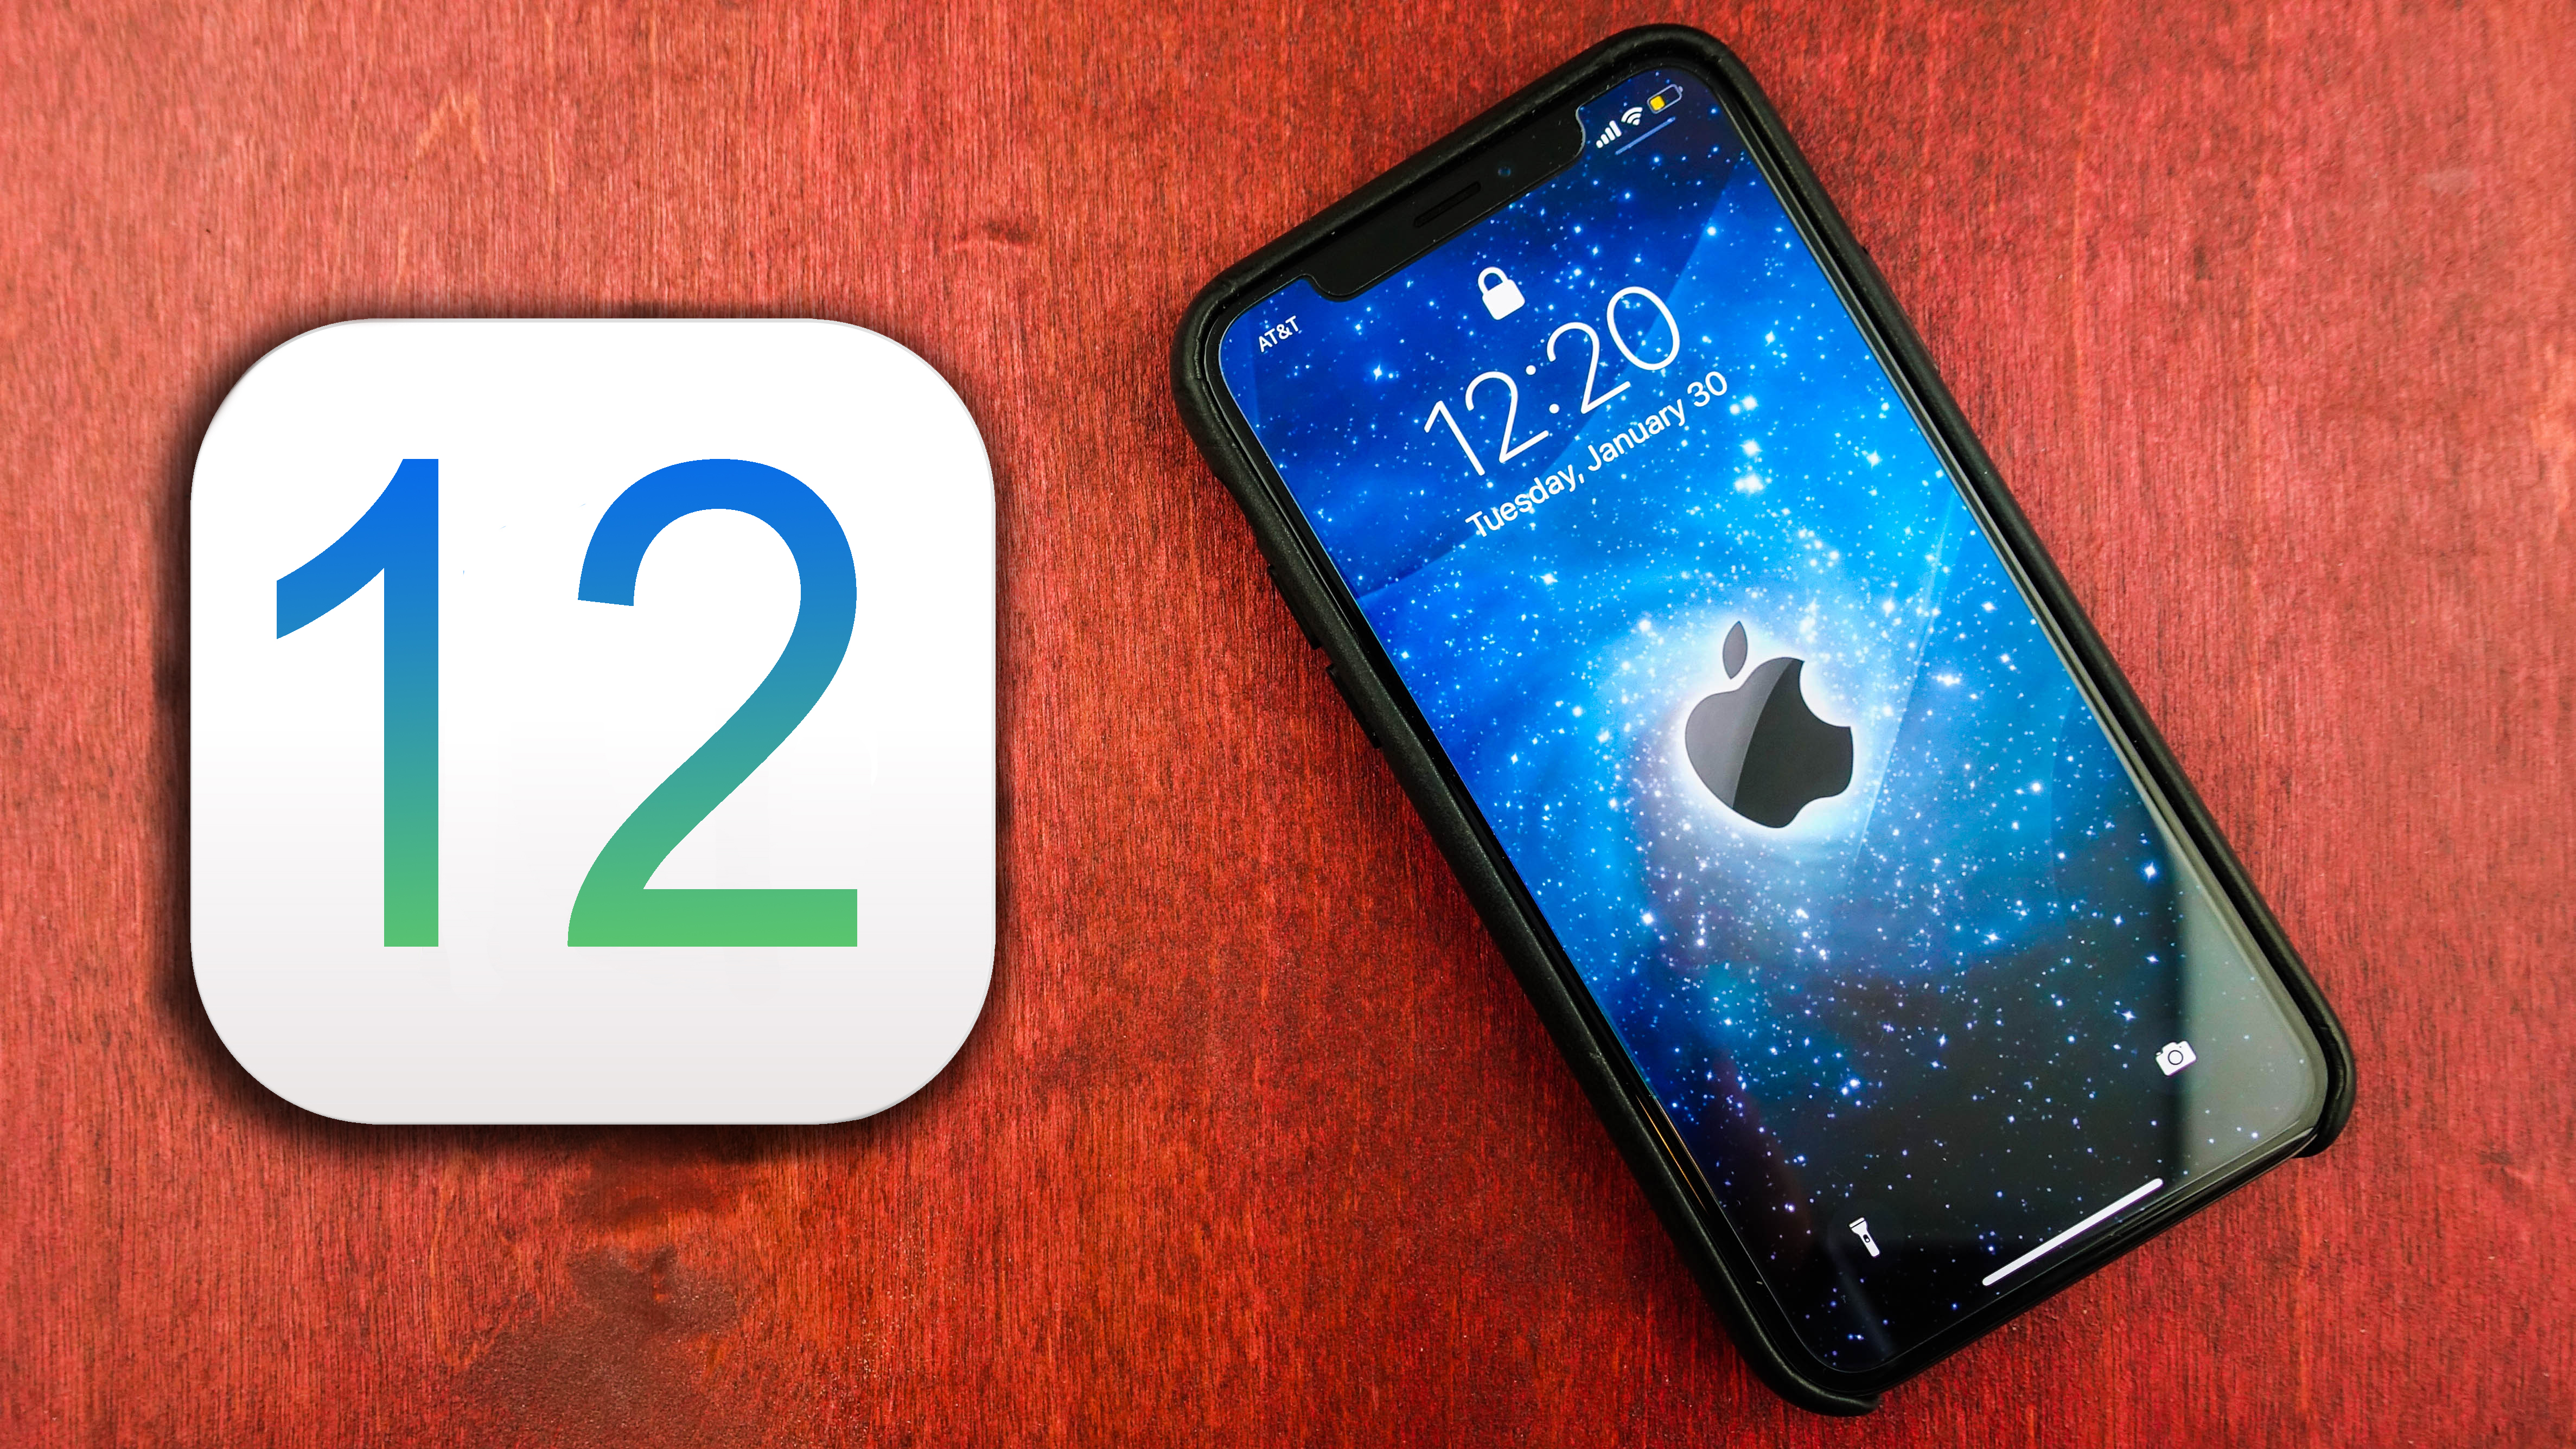 Apple Ios 12 Will Be Available In September 2018 On Iphones